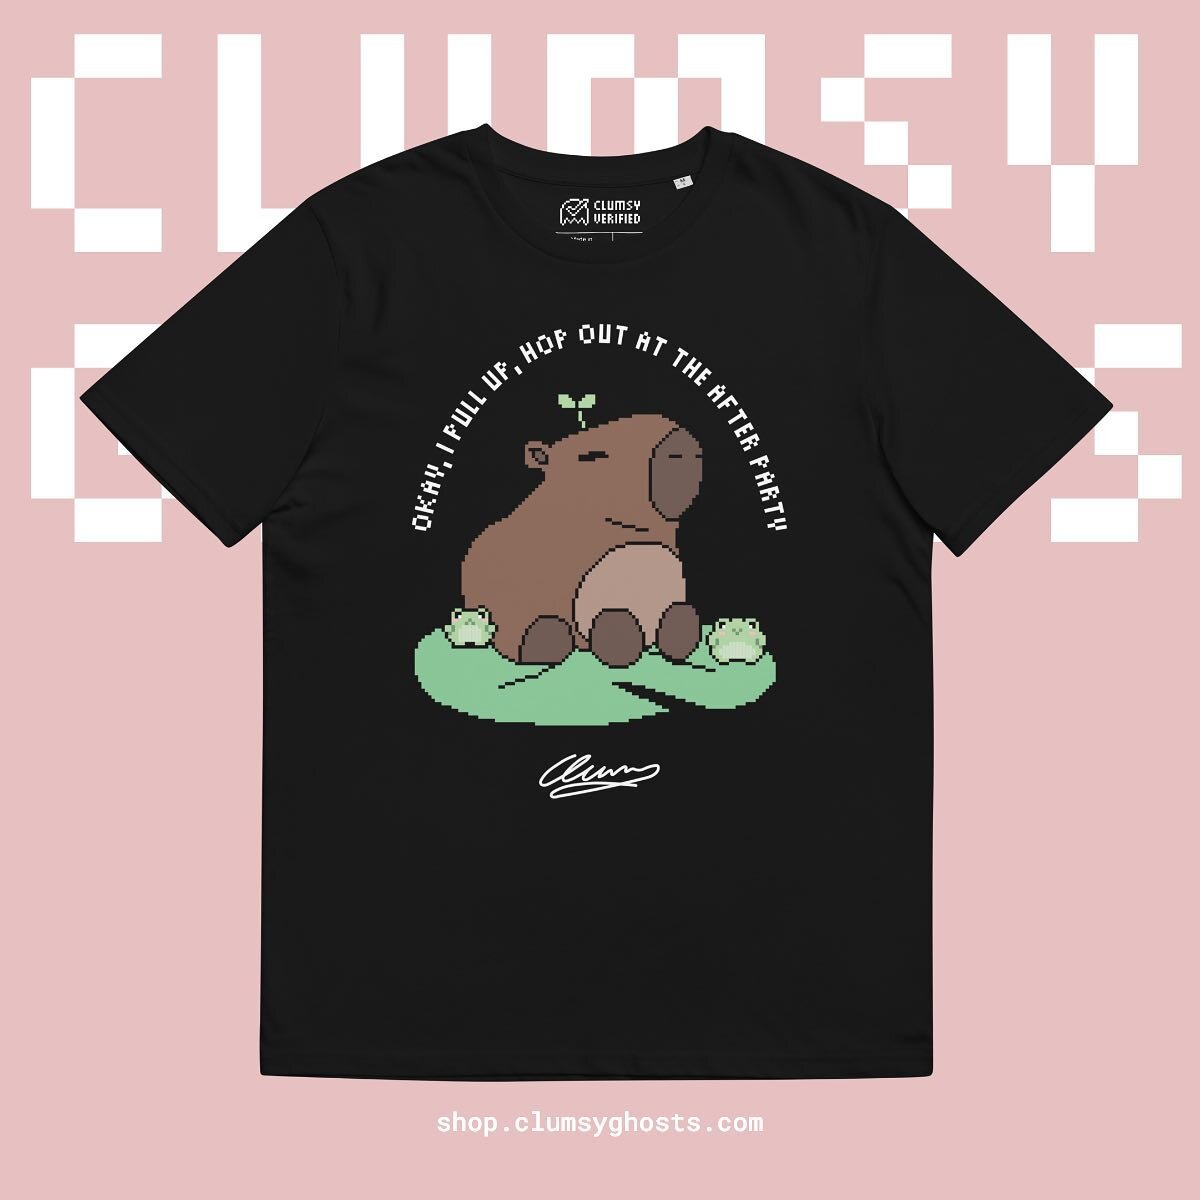 Okay, I pull up! New Tee by Clumsy Ghosts! Receive an NFT with purchase (you will receive the NFT a later date). Insert #cardano wallet address when adding to cart. Shop.clumsyghosts.com